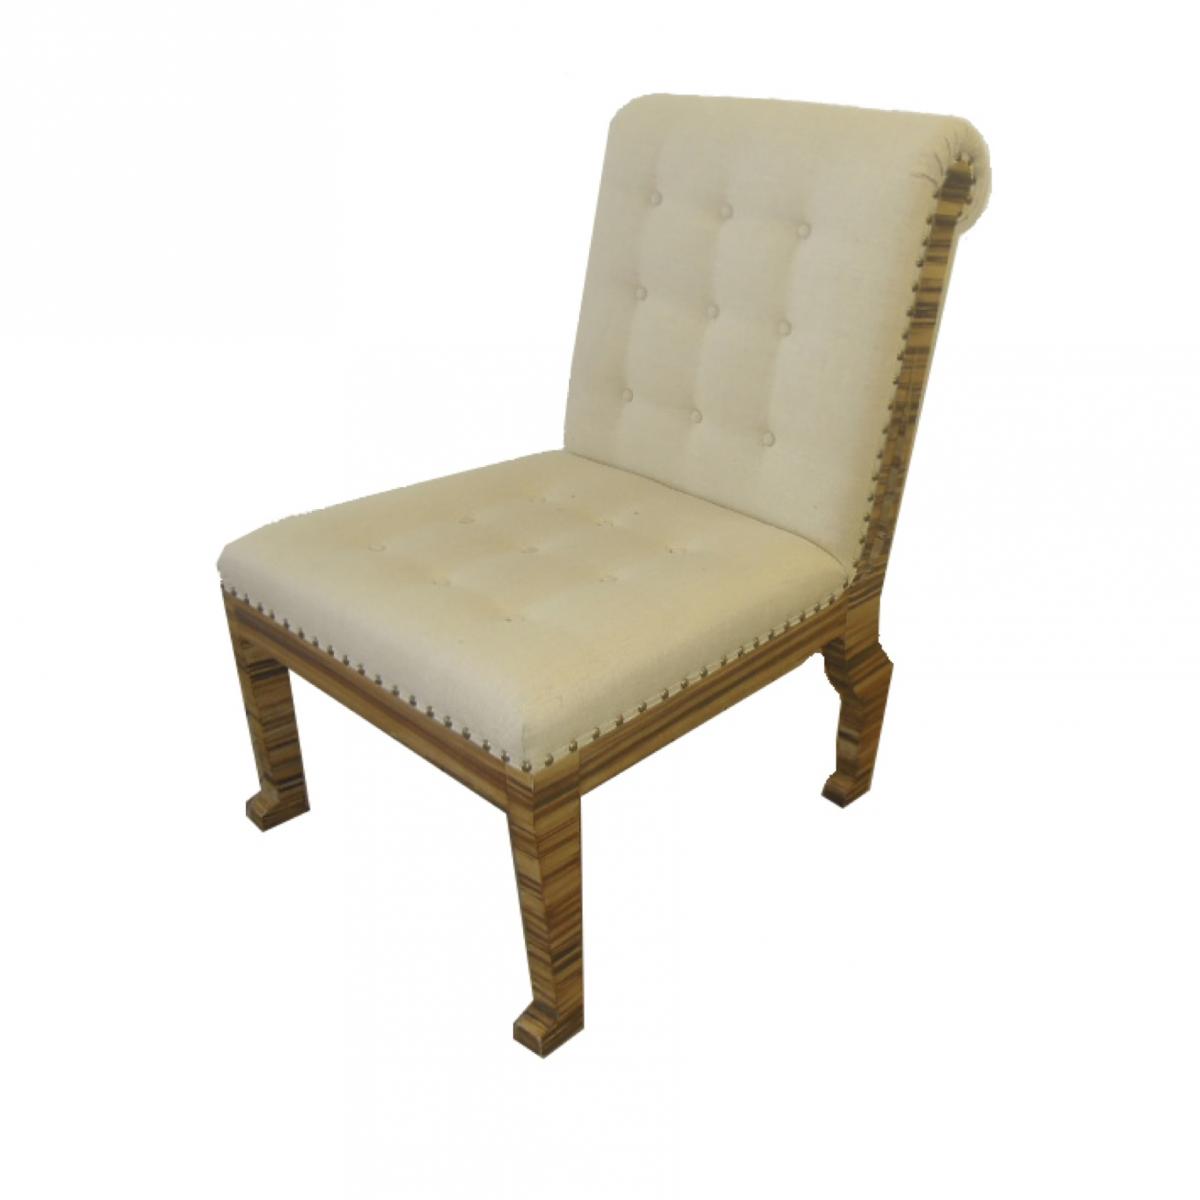 Armless chair reupholstered in cream fabric with tufting